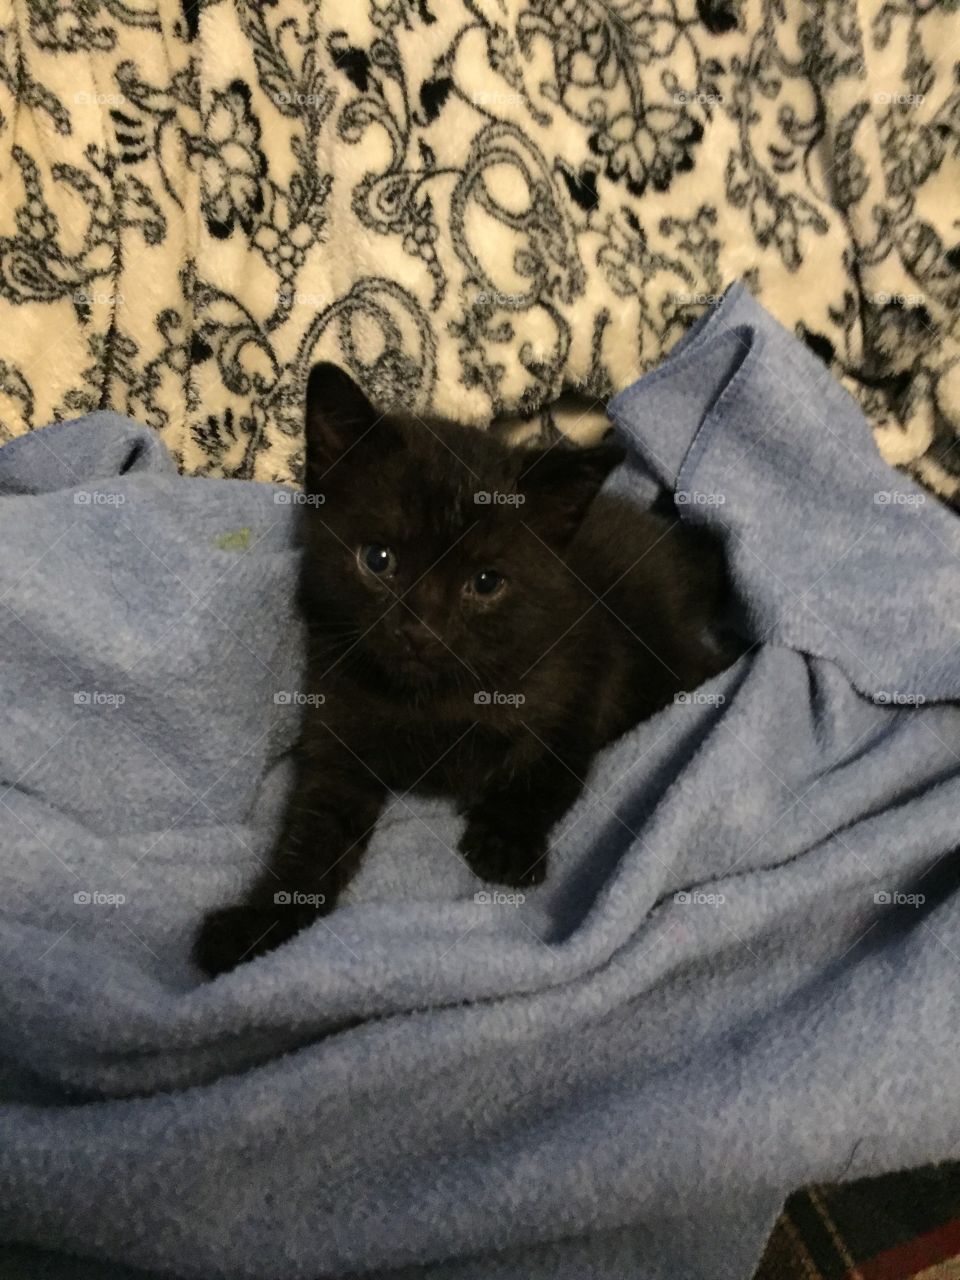 Black fuzzy orphan kitten missing his mama.